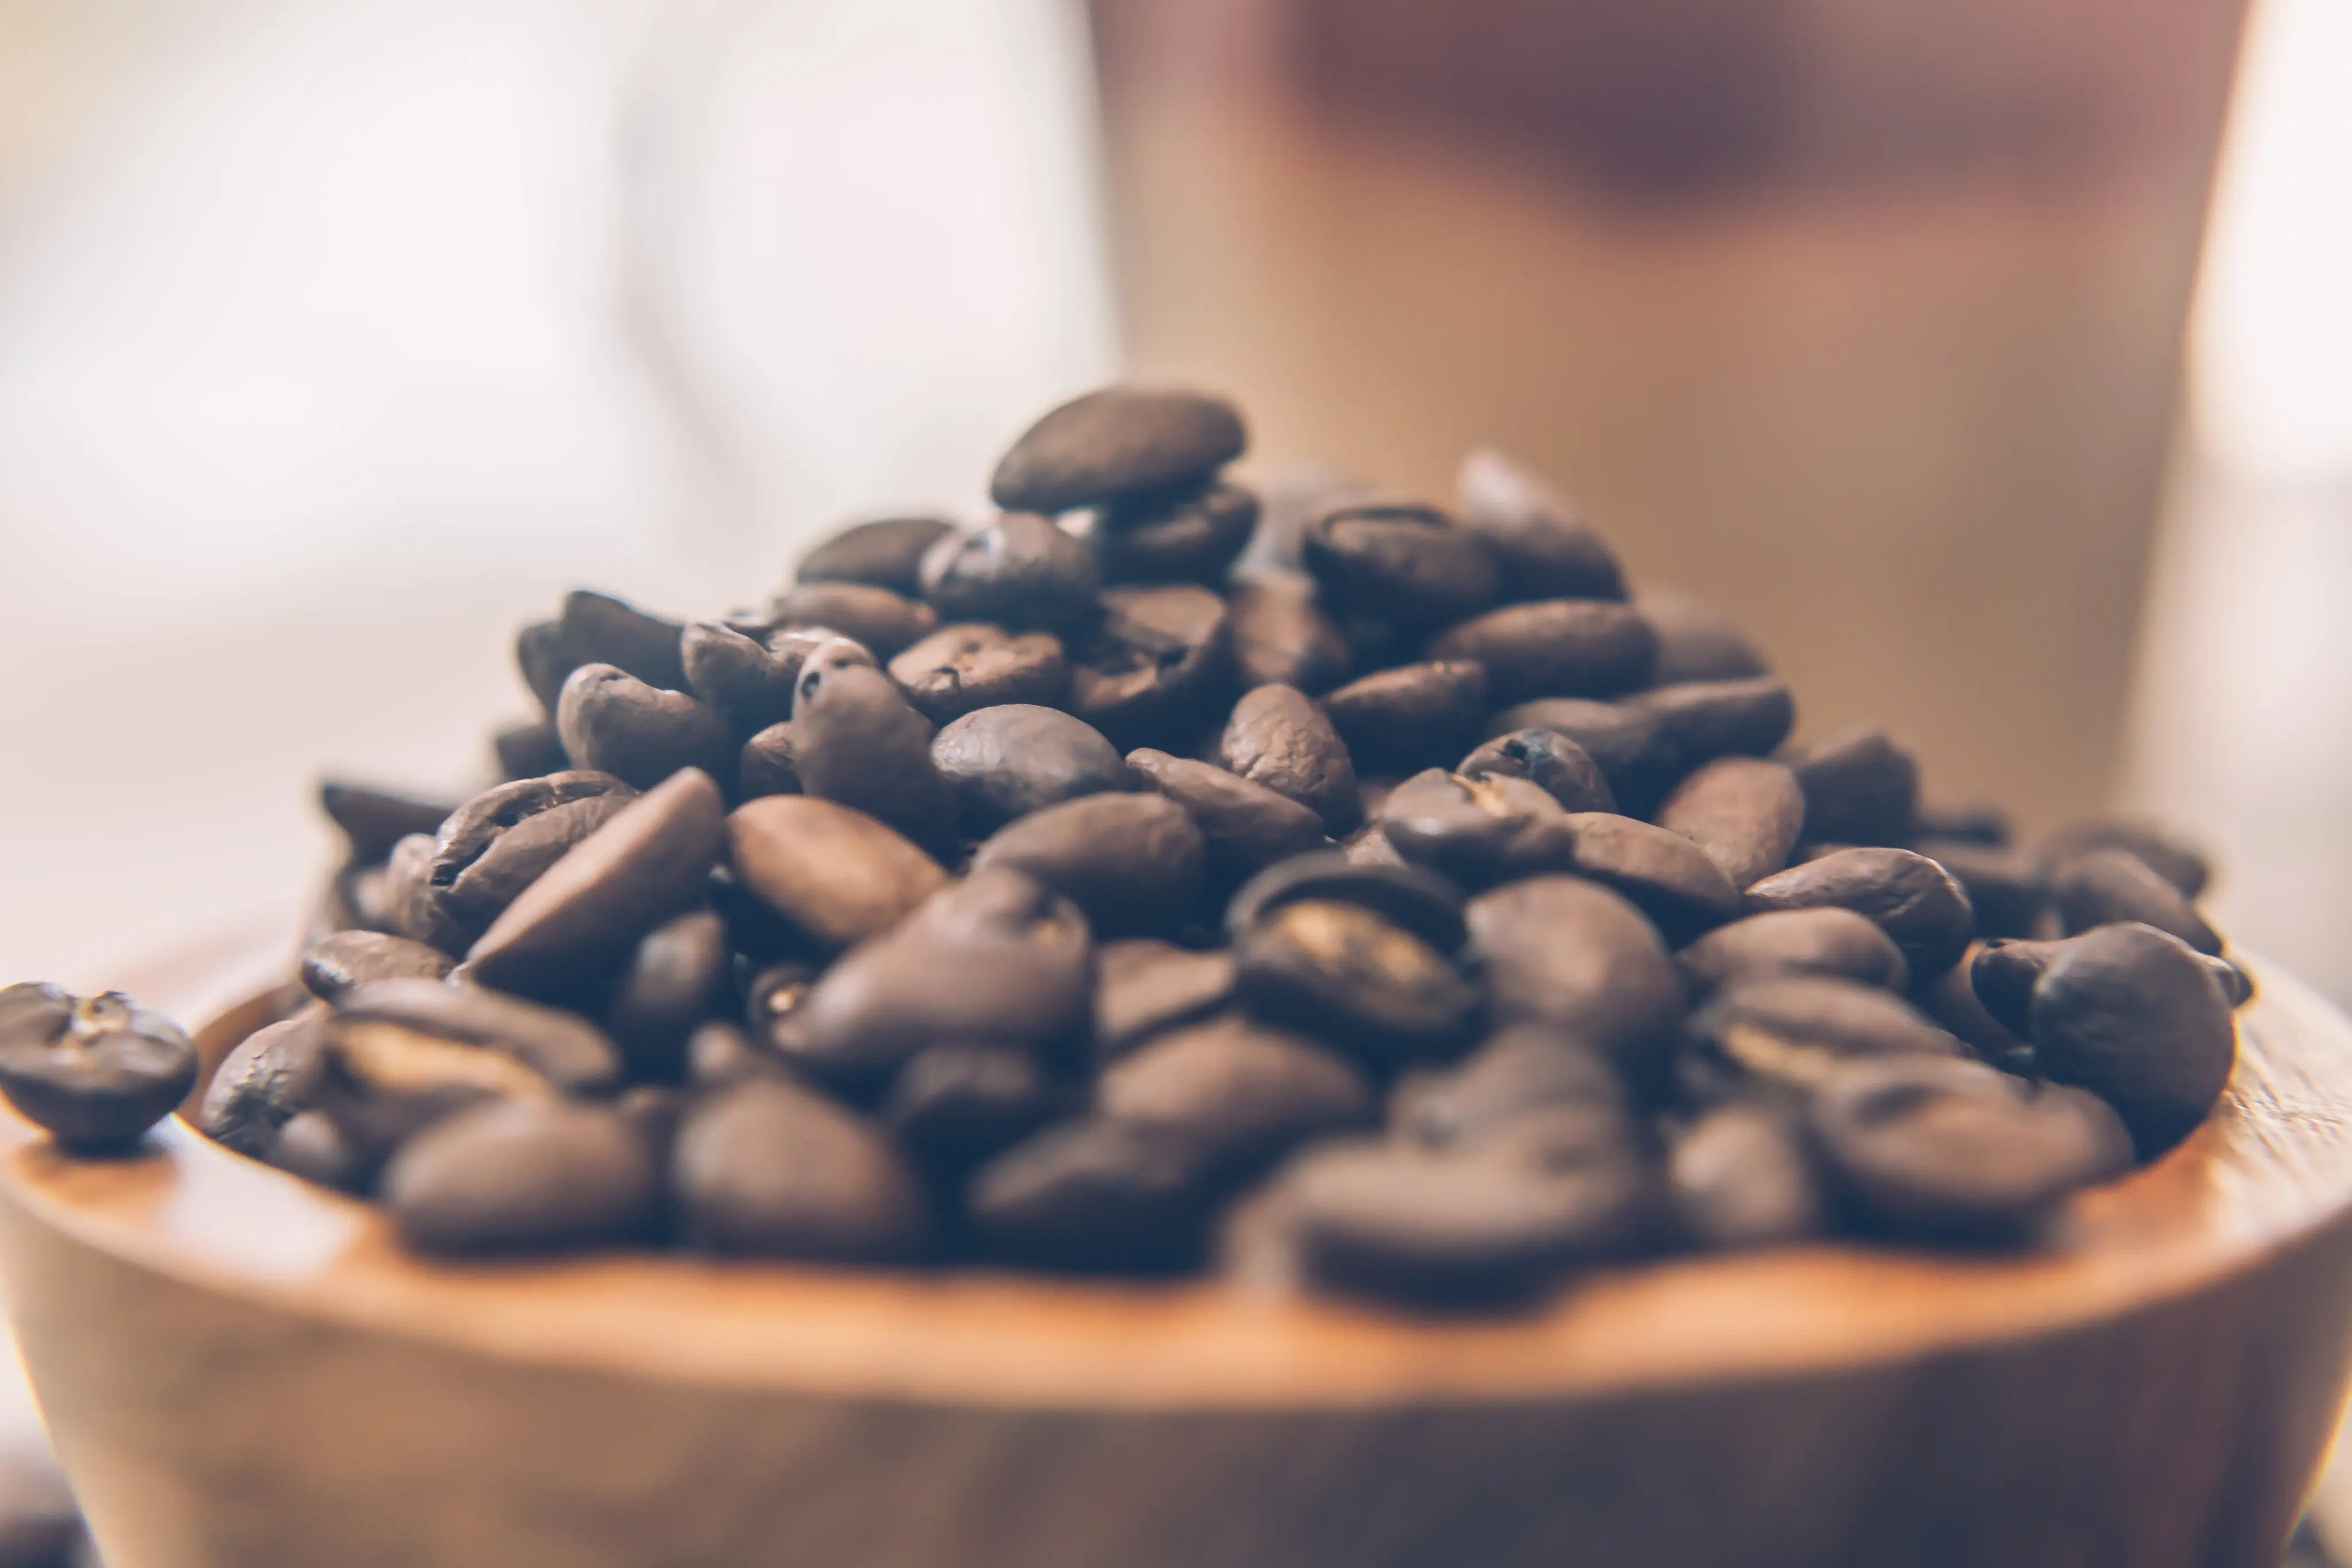 Peak Flavor selects naturally sweet coffee beans